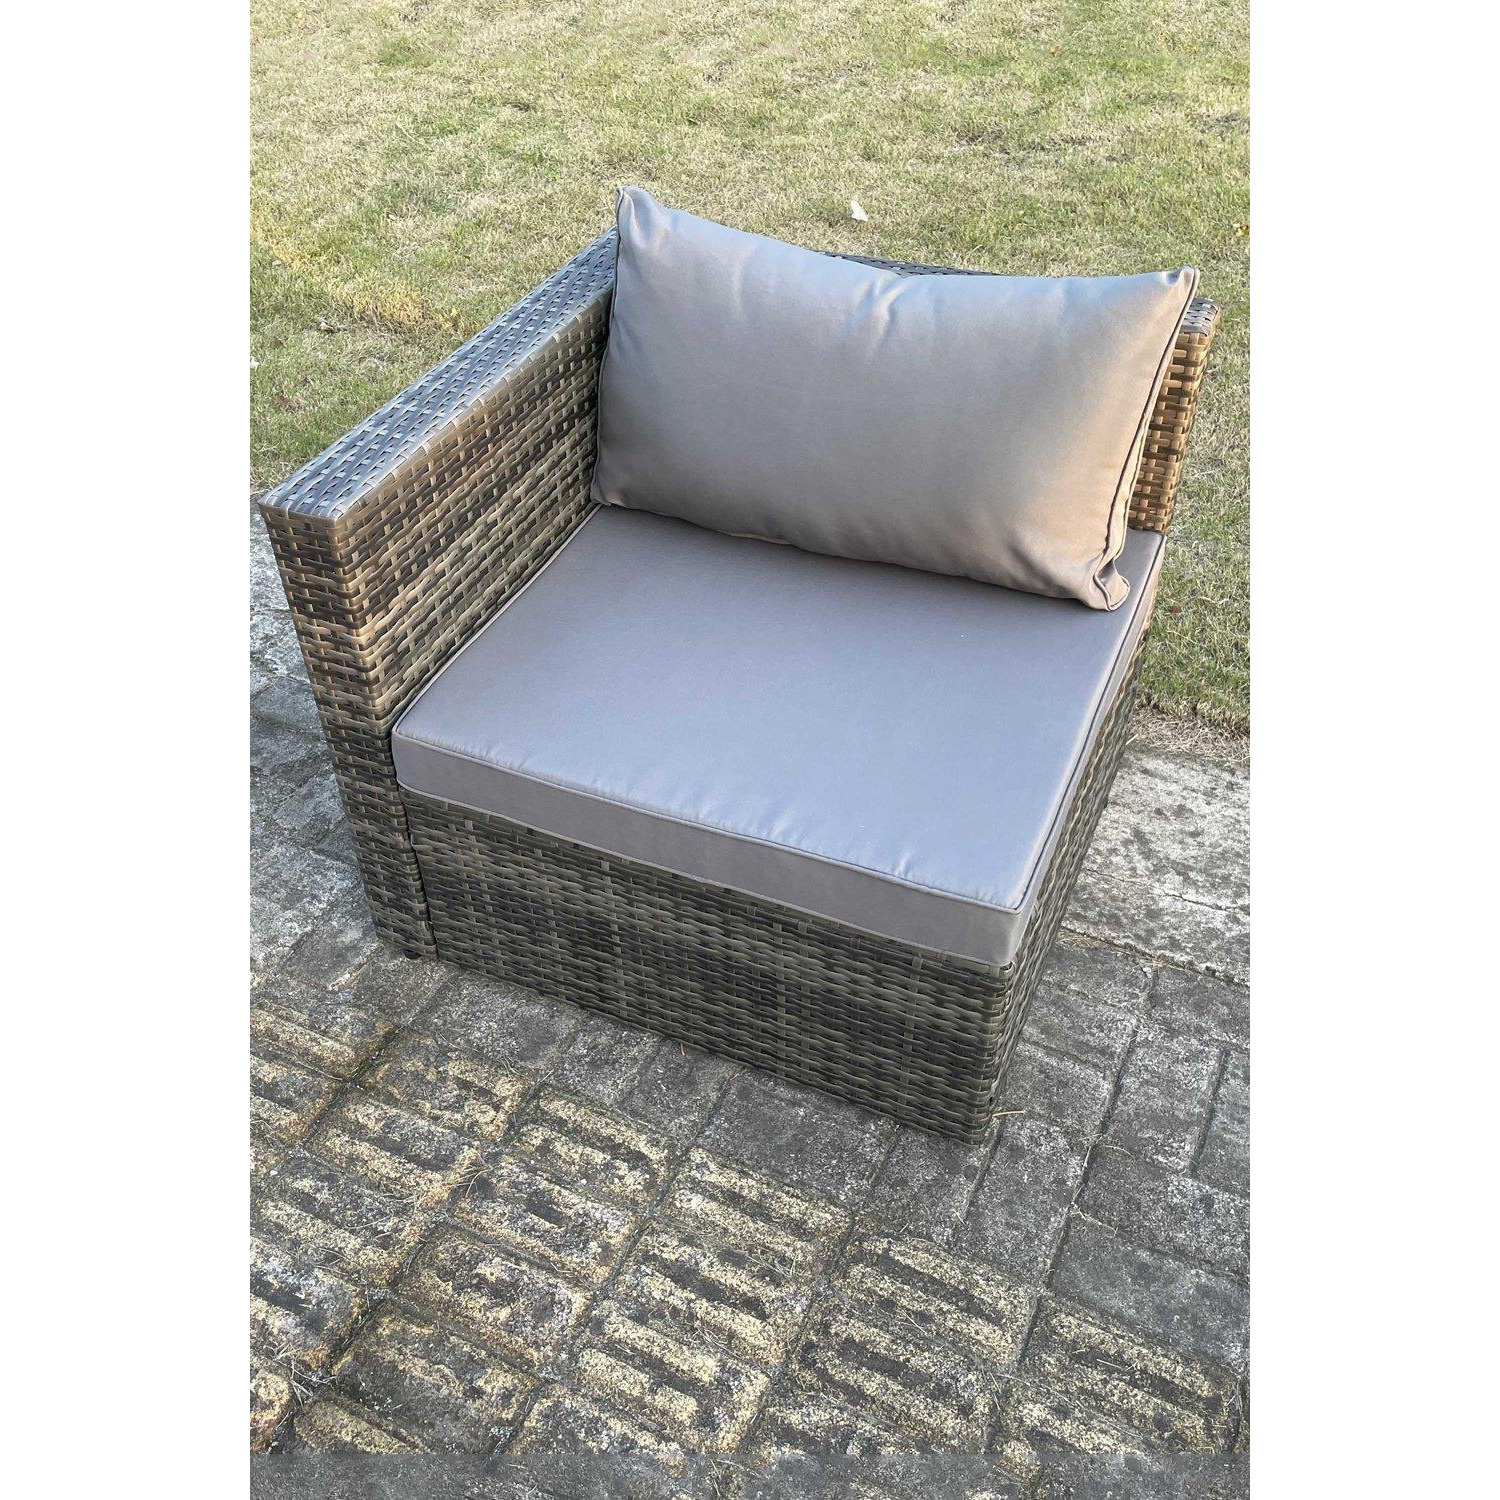 Outdoor Rattan Single Arm Corner Sofa Chair Garden Furniture With Seat and Back Cushion - image 1